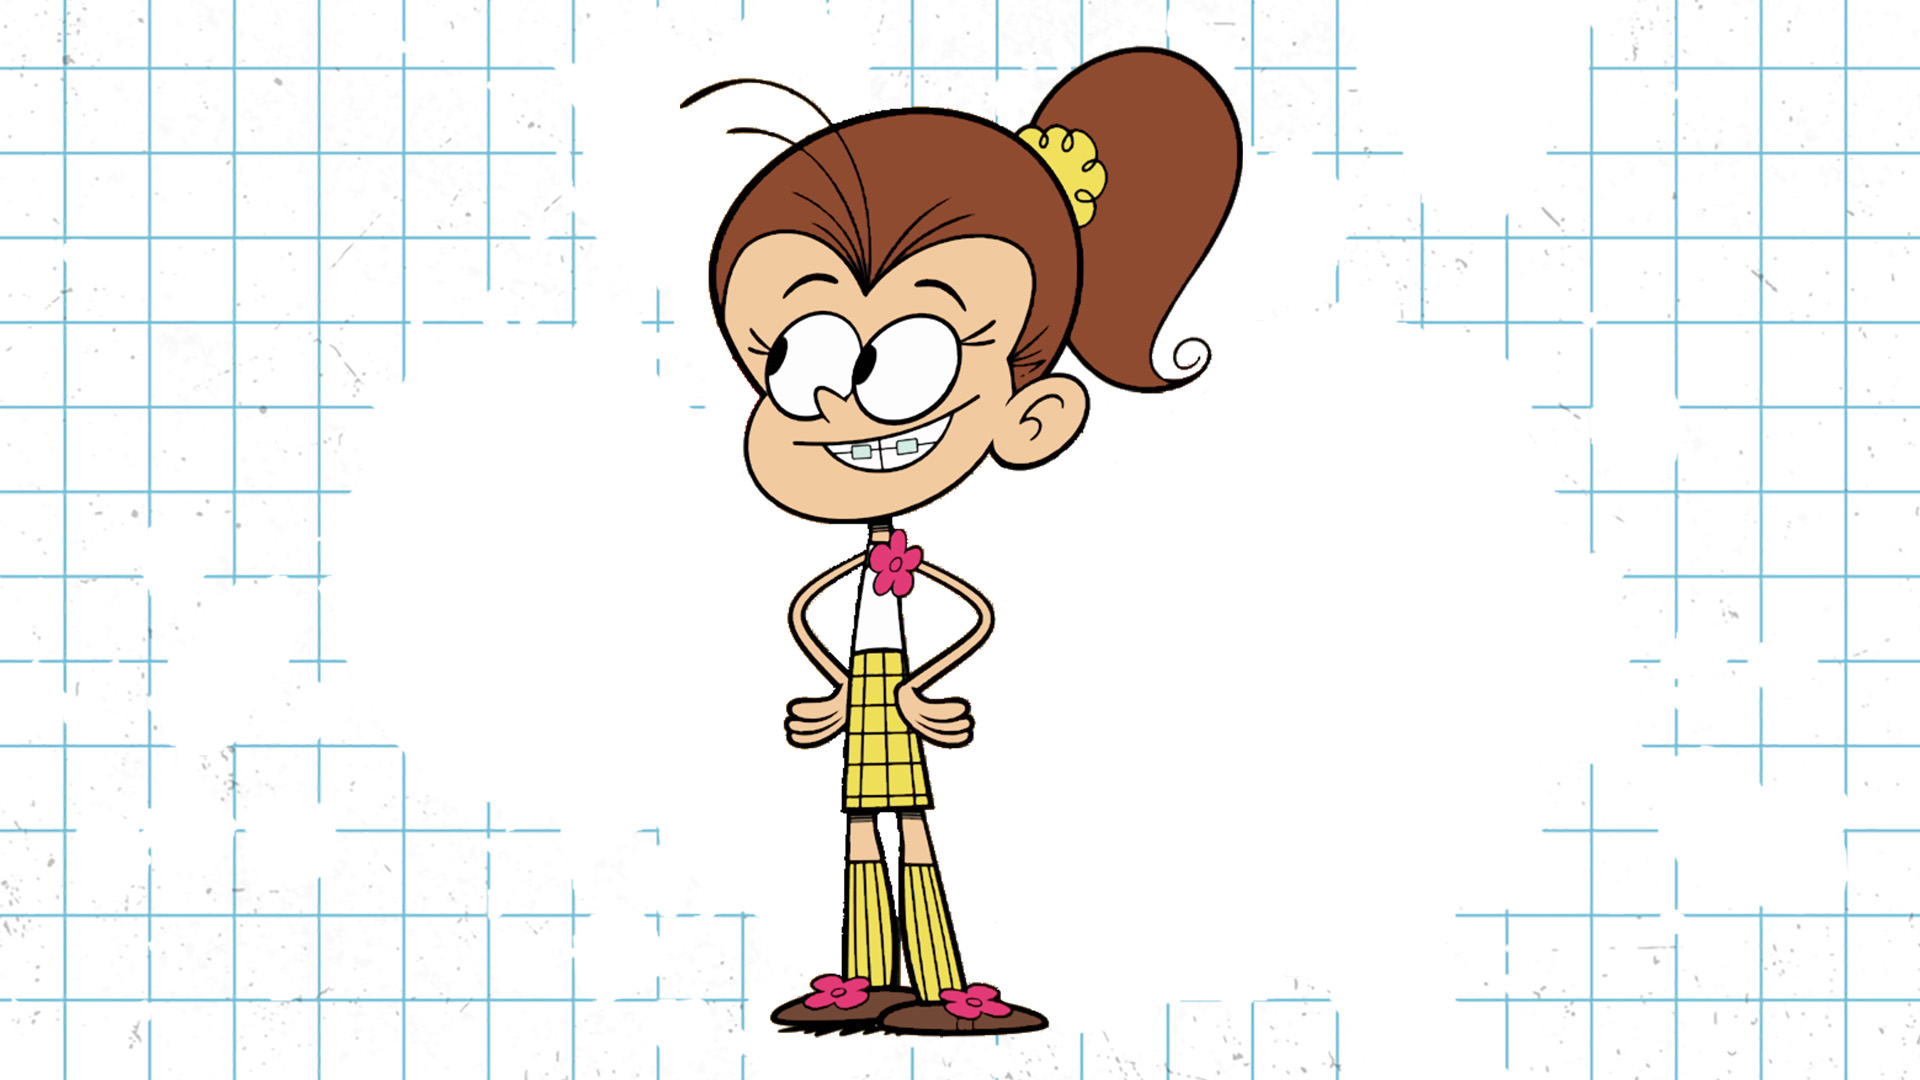 A Loud House character with brown hair